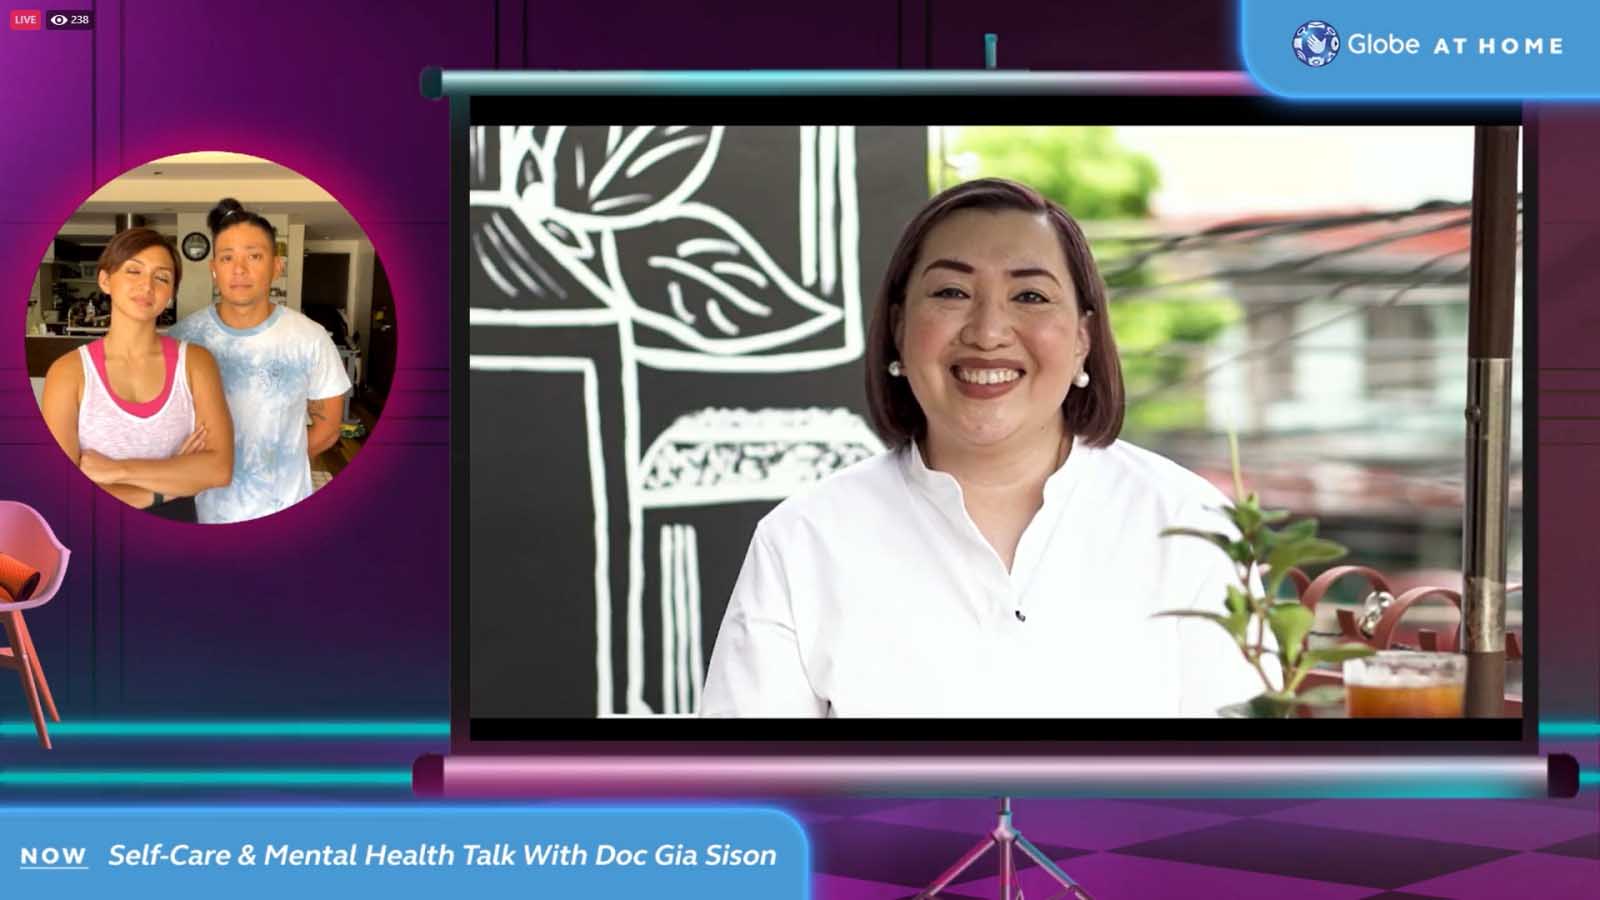 Globe At Home Enables Everyone To Kick Start Their Wellness Journey ...